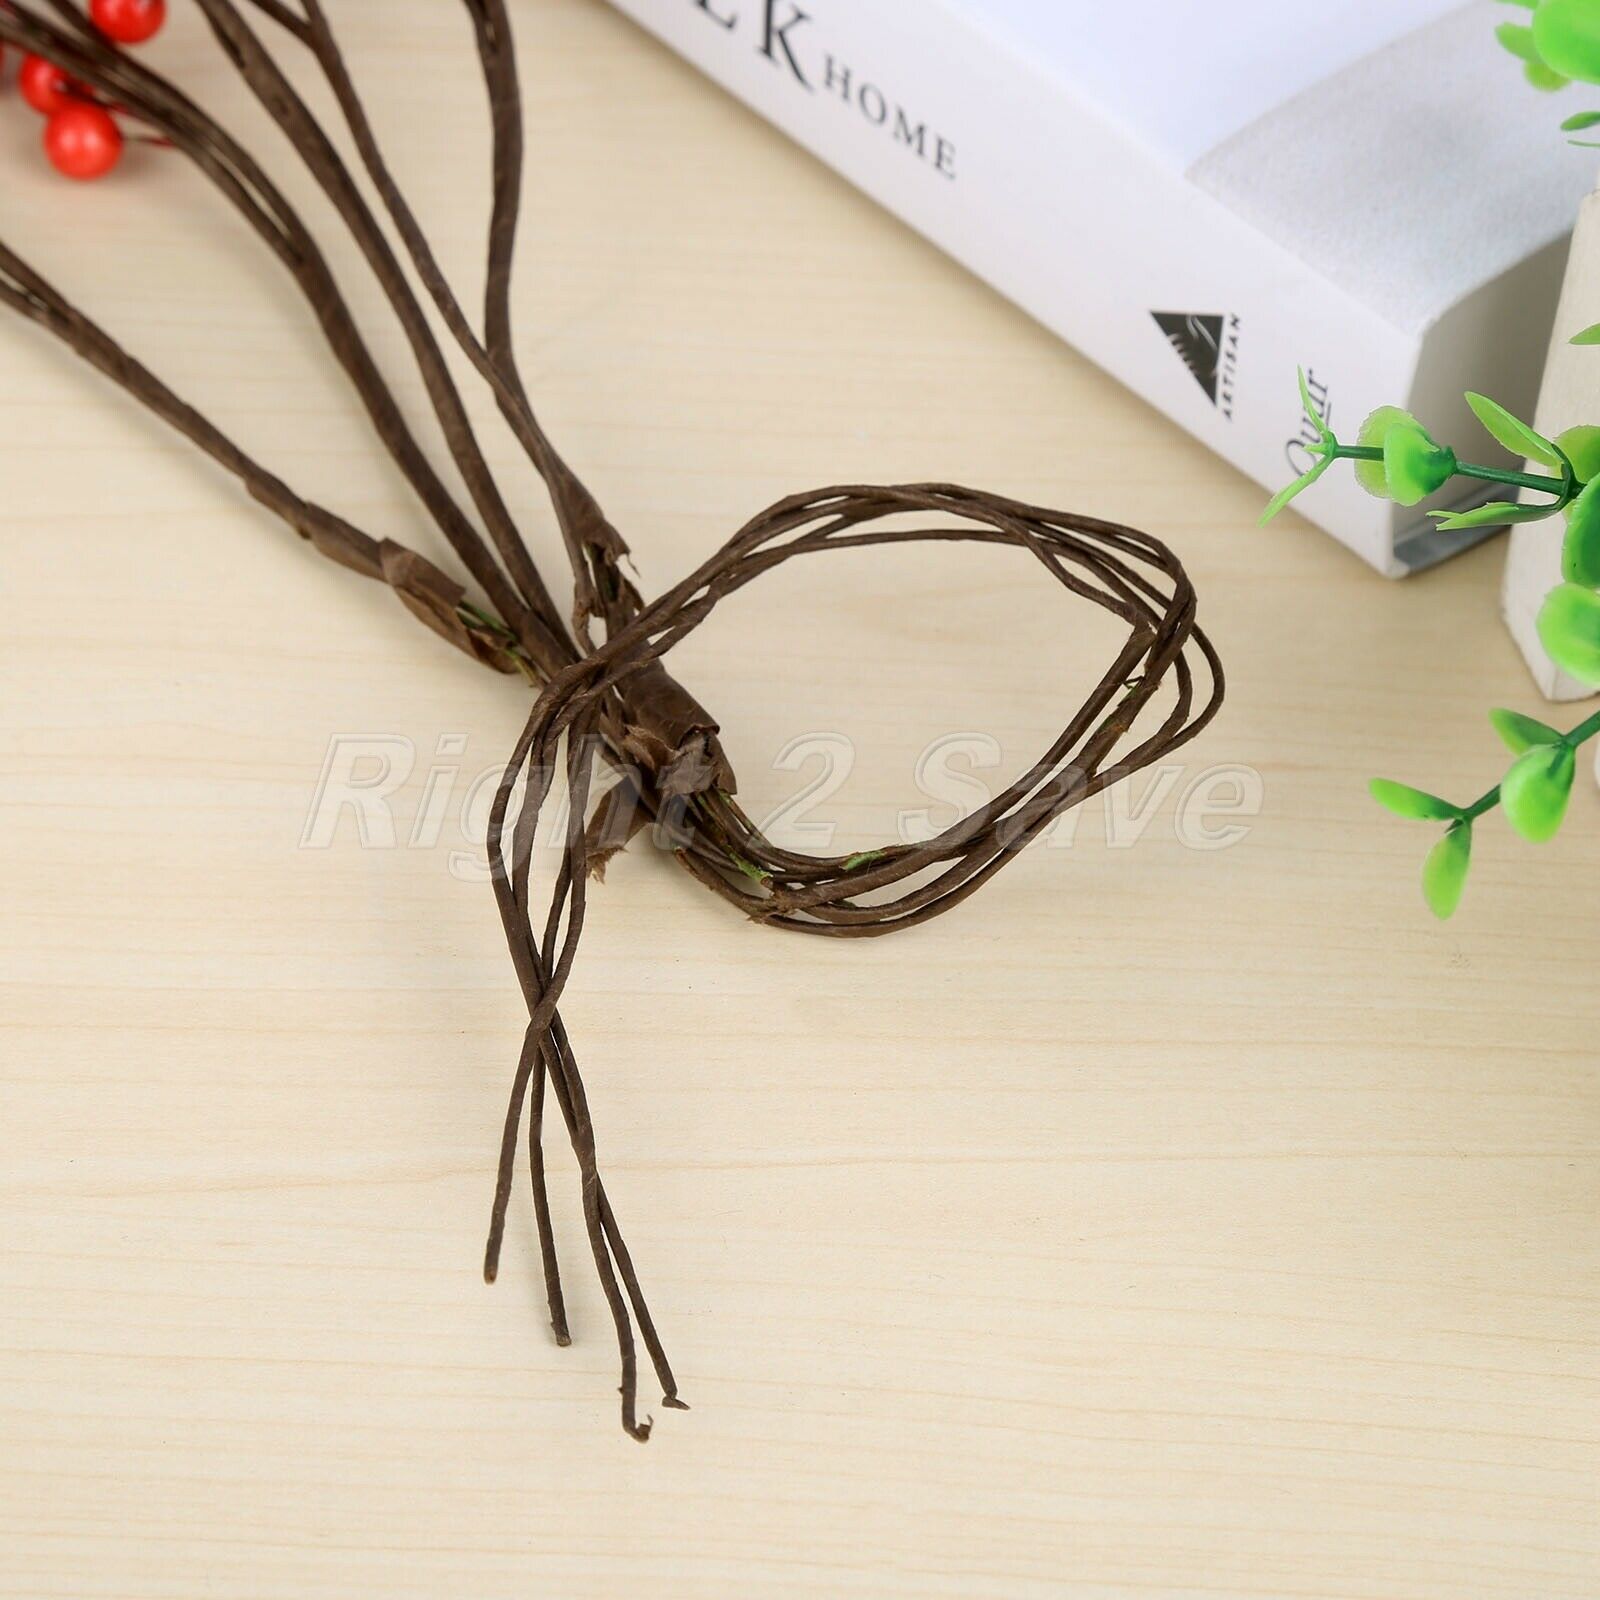 1/5Pcs 45cm Red Artificial Holly Berries Branch Decoration DIY Christmas Wreath